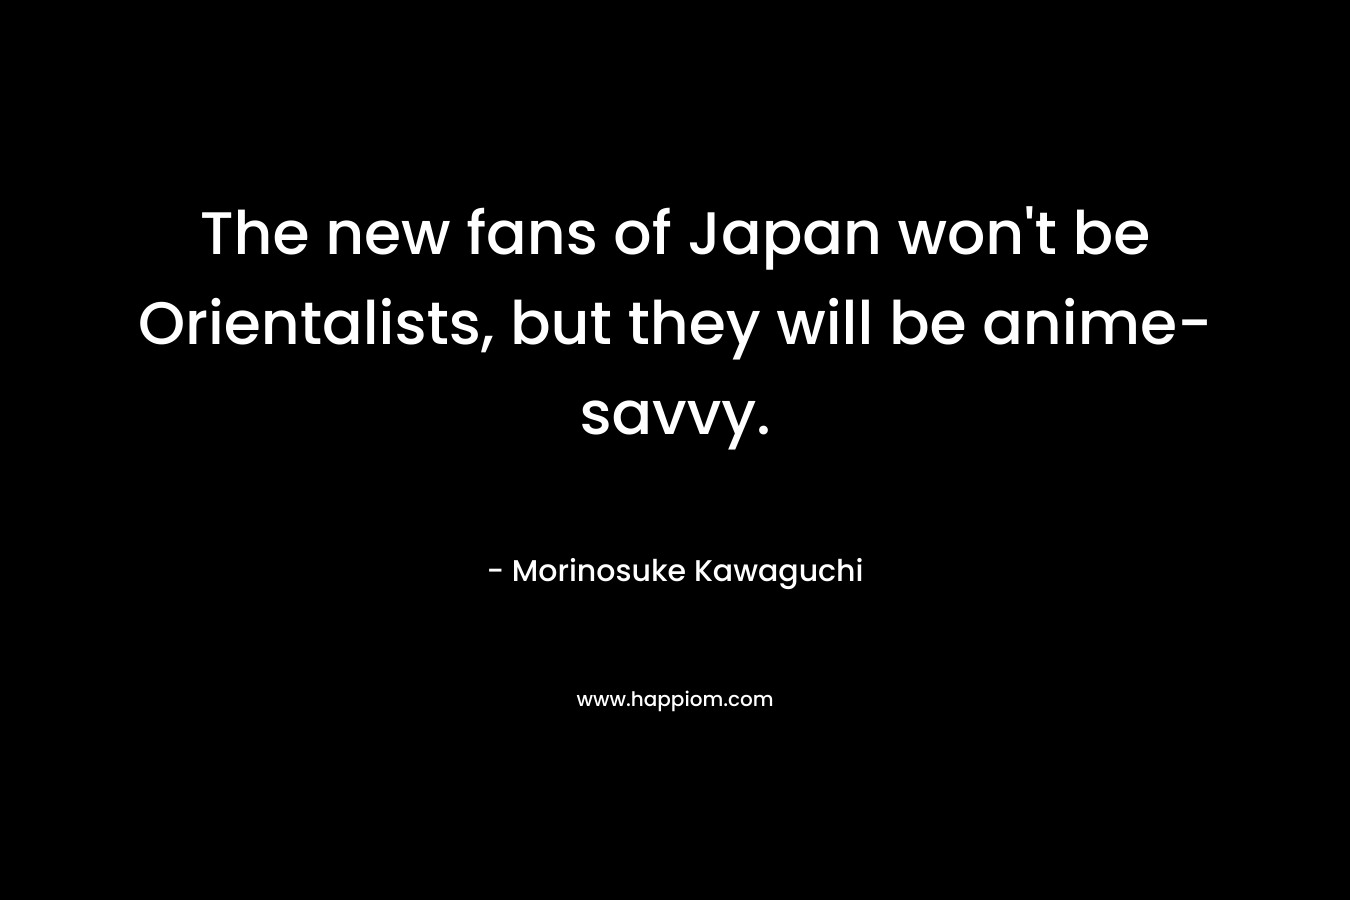 The new fans of Japan won't be Orientalists, but they will be anime-savvy.